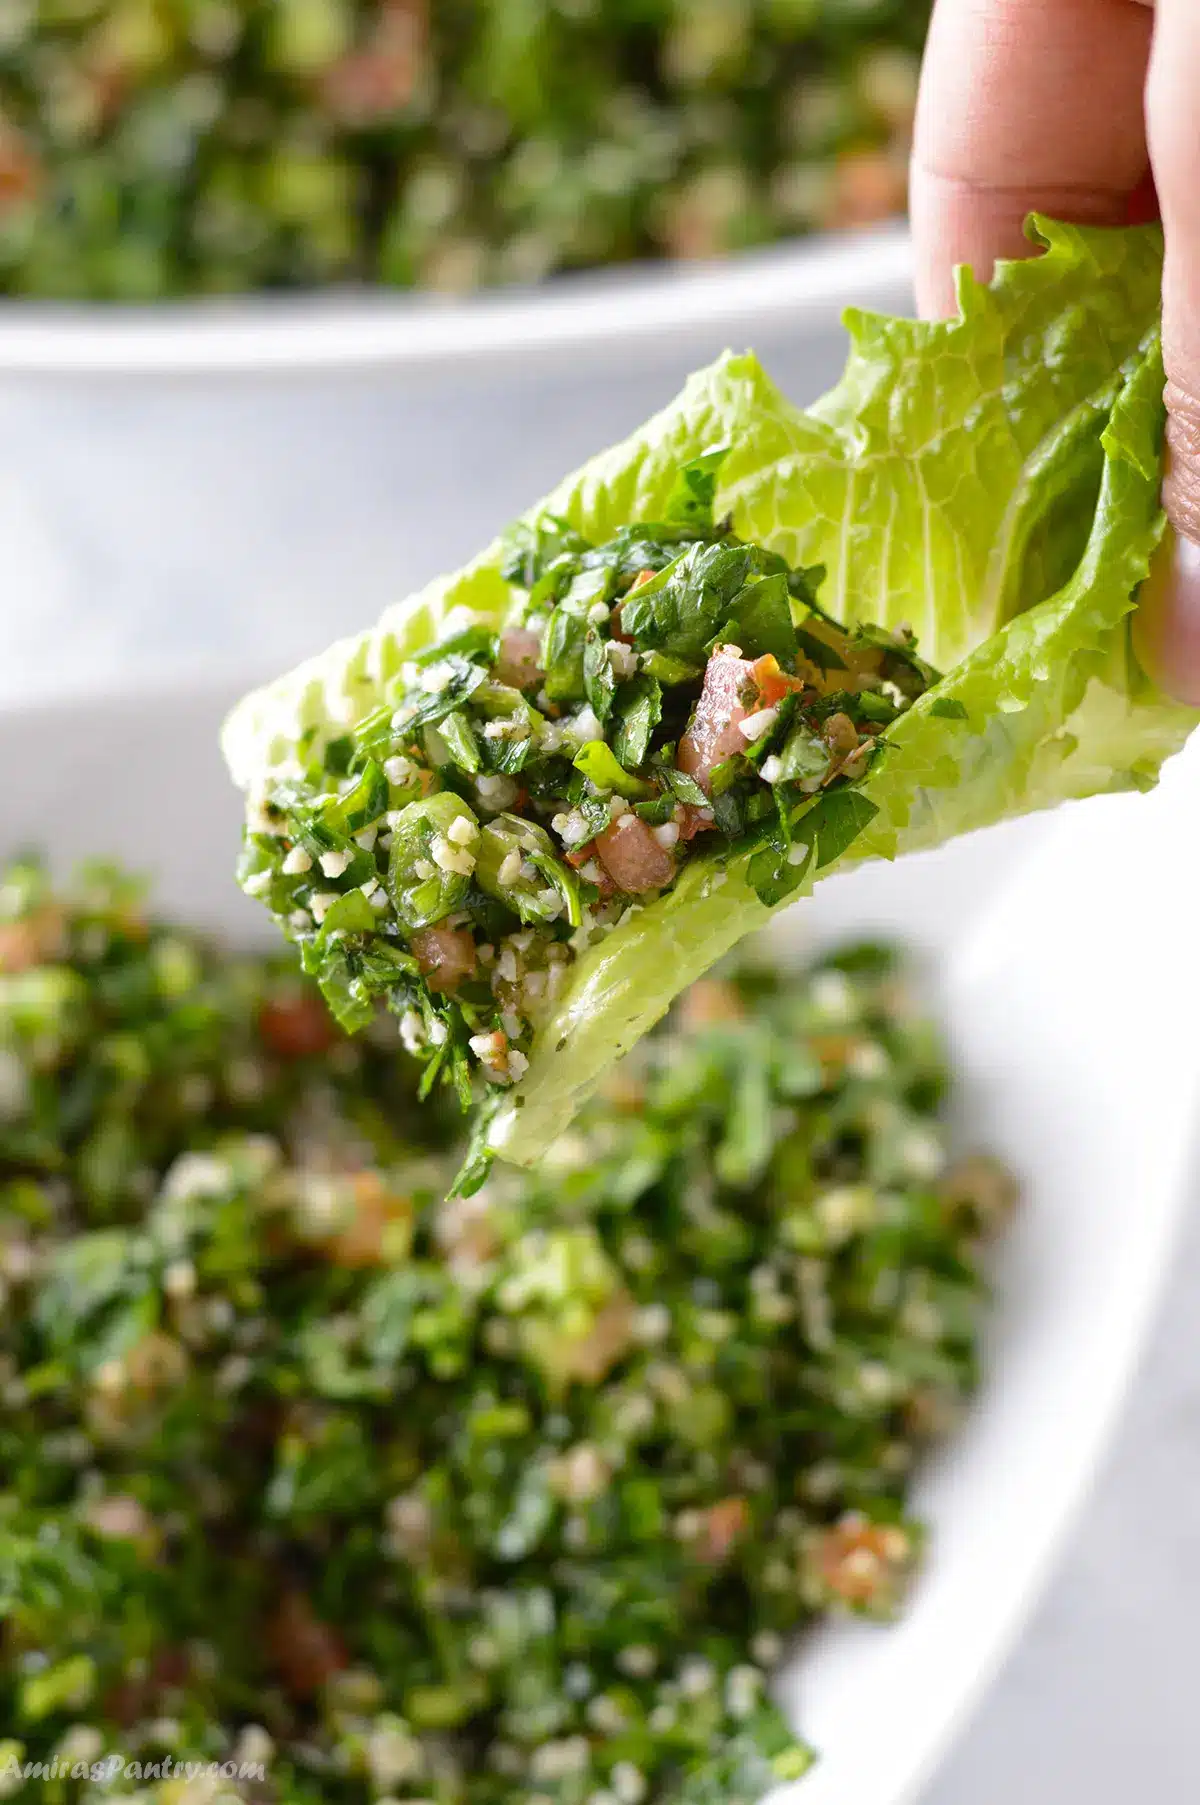 A hand scooping some tabouli with lettuce.